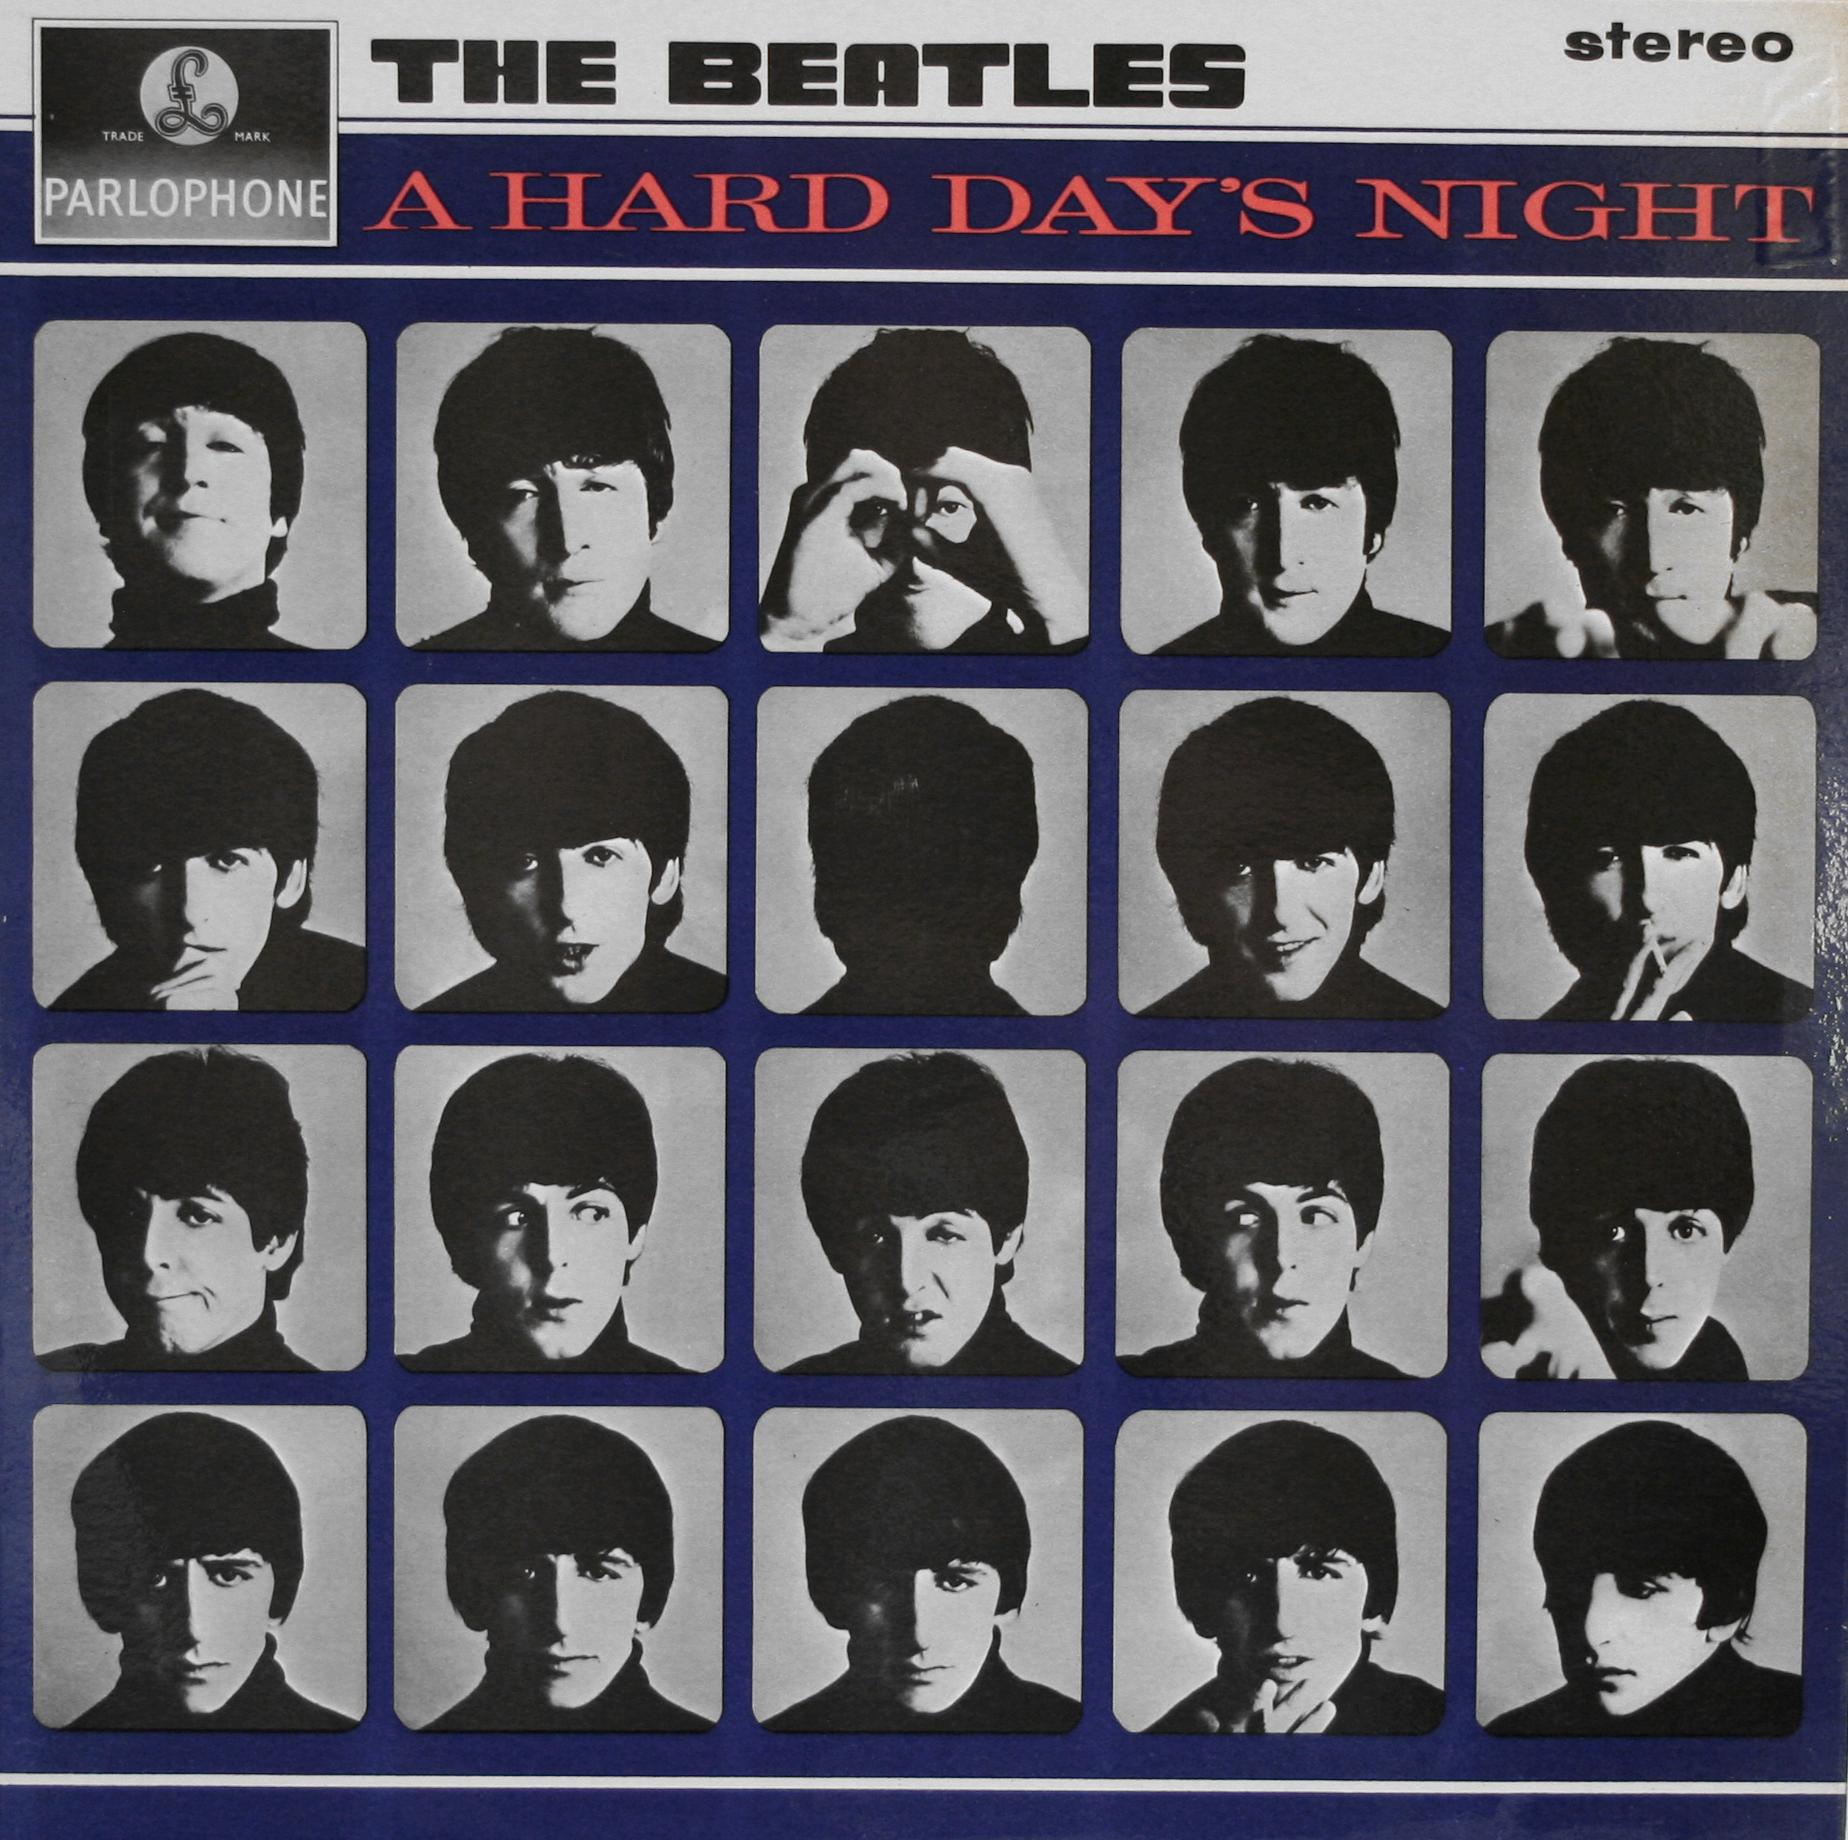 A Hard Day's Night (Stereo)